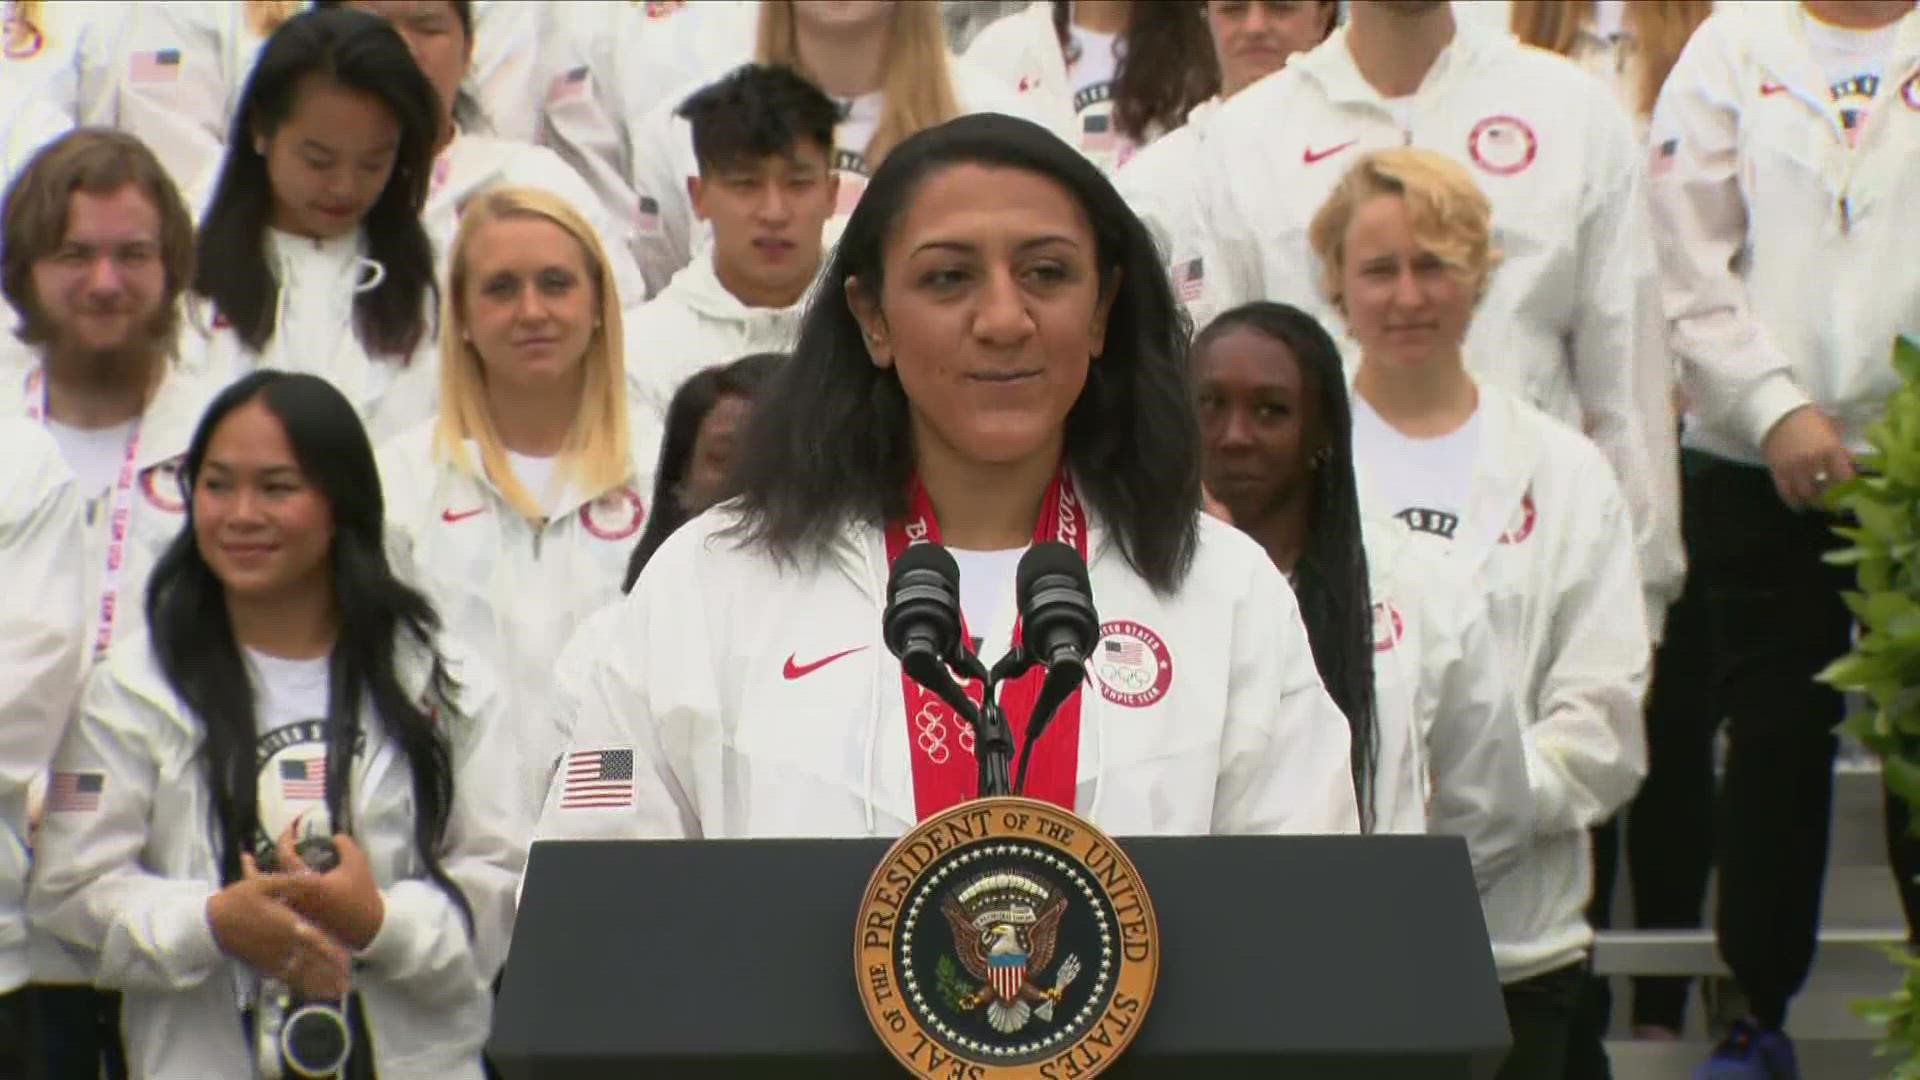 The U.S. Olympian congratulated her teammates for their resilience in the face of major world events.